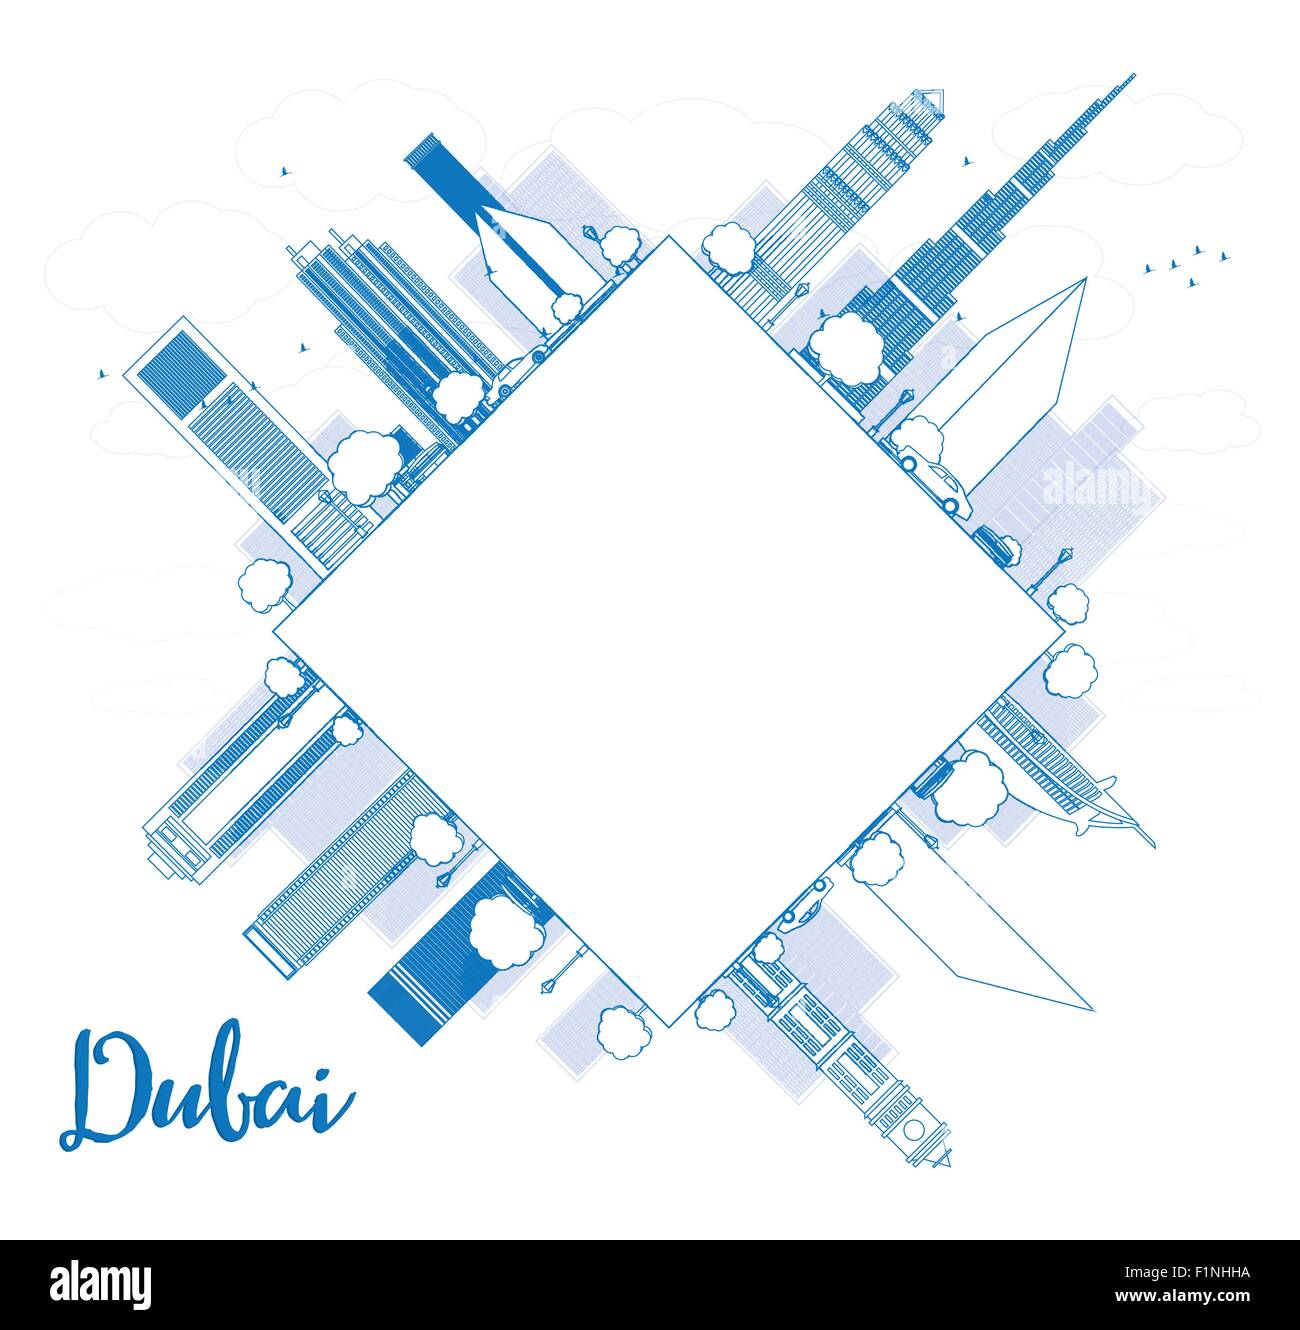 Dubai City skyline with blue skyscrapers and copy space. Vector illustration Stock Vector